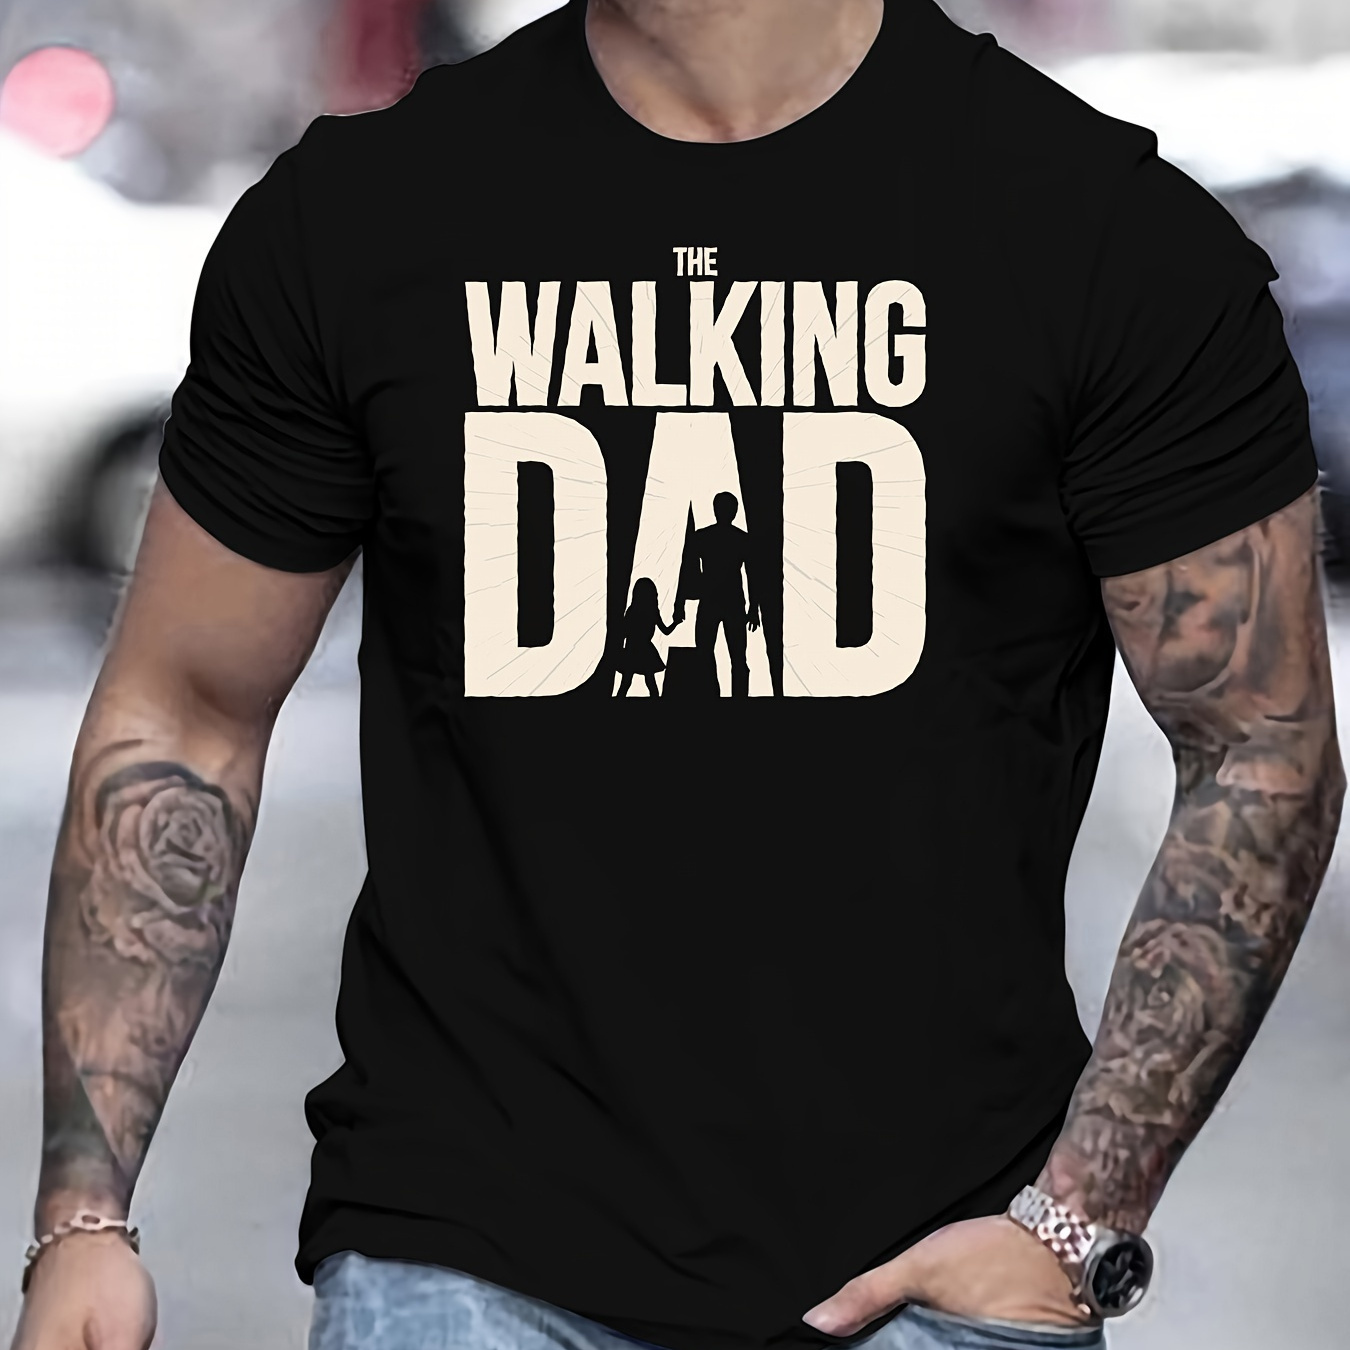 

Walking Dad Creative Alphabet Print Crew Neck Short Sleeve T-shirt For Men, Comfy Casual Summer T-shirt For Daily Wear Work Out And Vacation Resorts